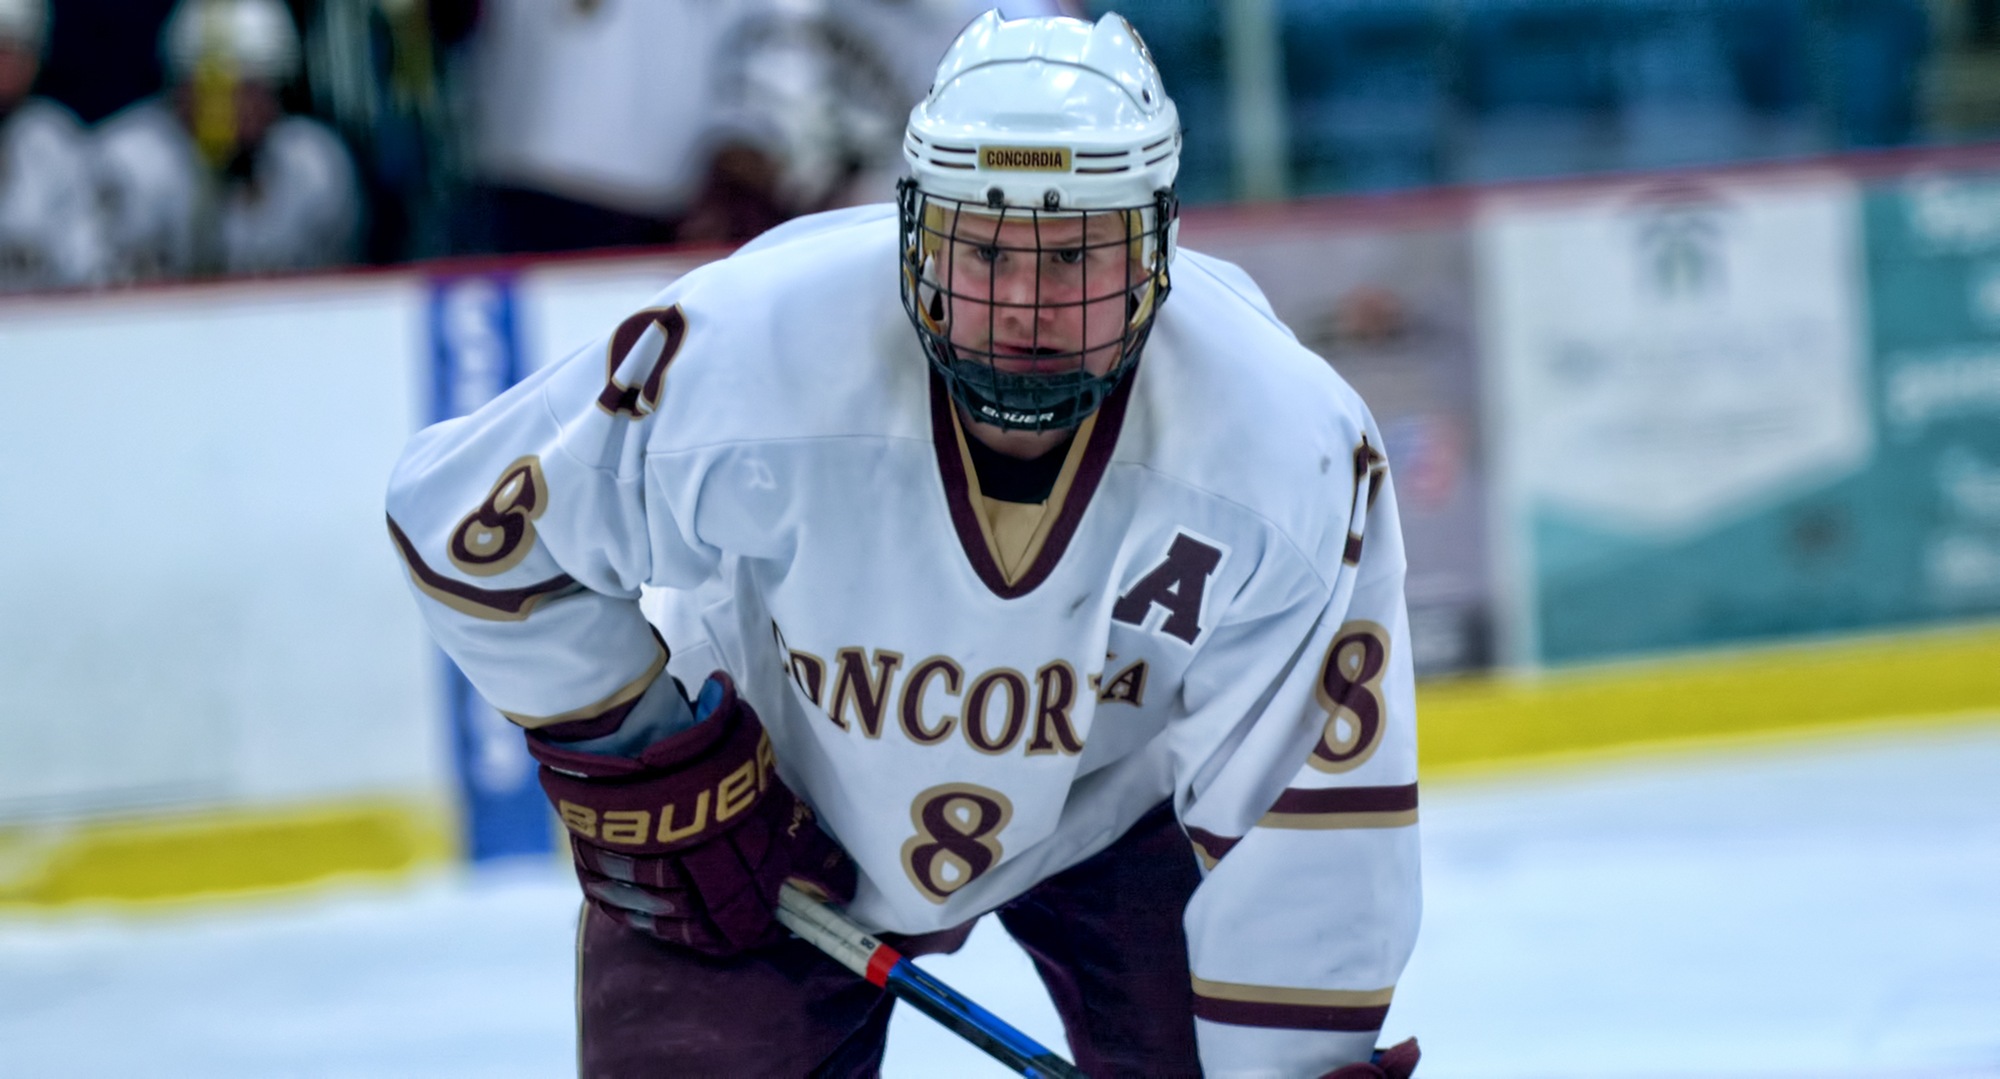 Senior Bryan Kronberger had two goals and three total points to help the Cobbers beat St. John's 4-2 and gain a split in the two-game series.